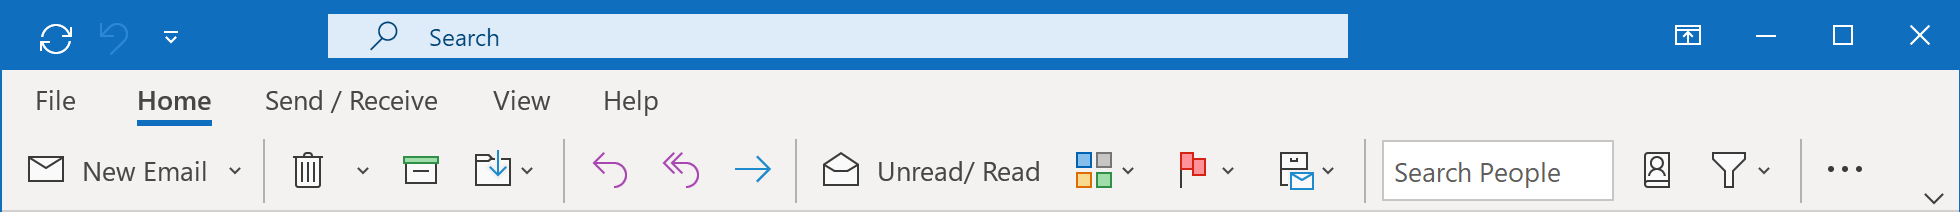 Outlook Ribbon - simplified view